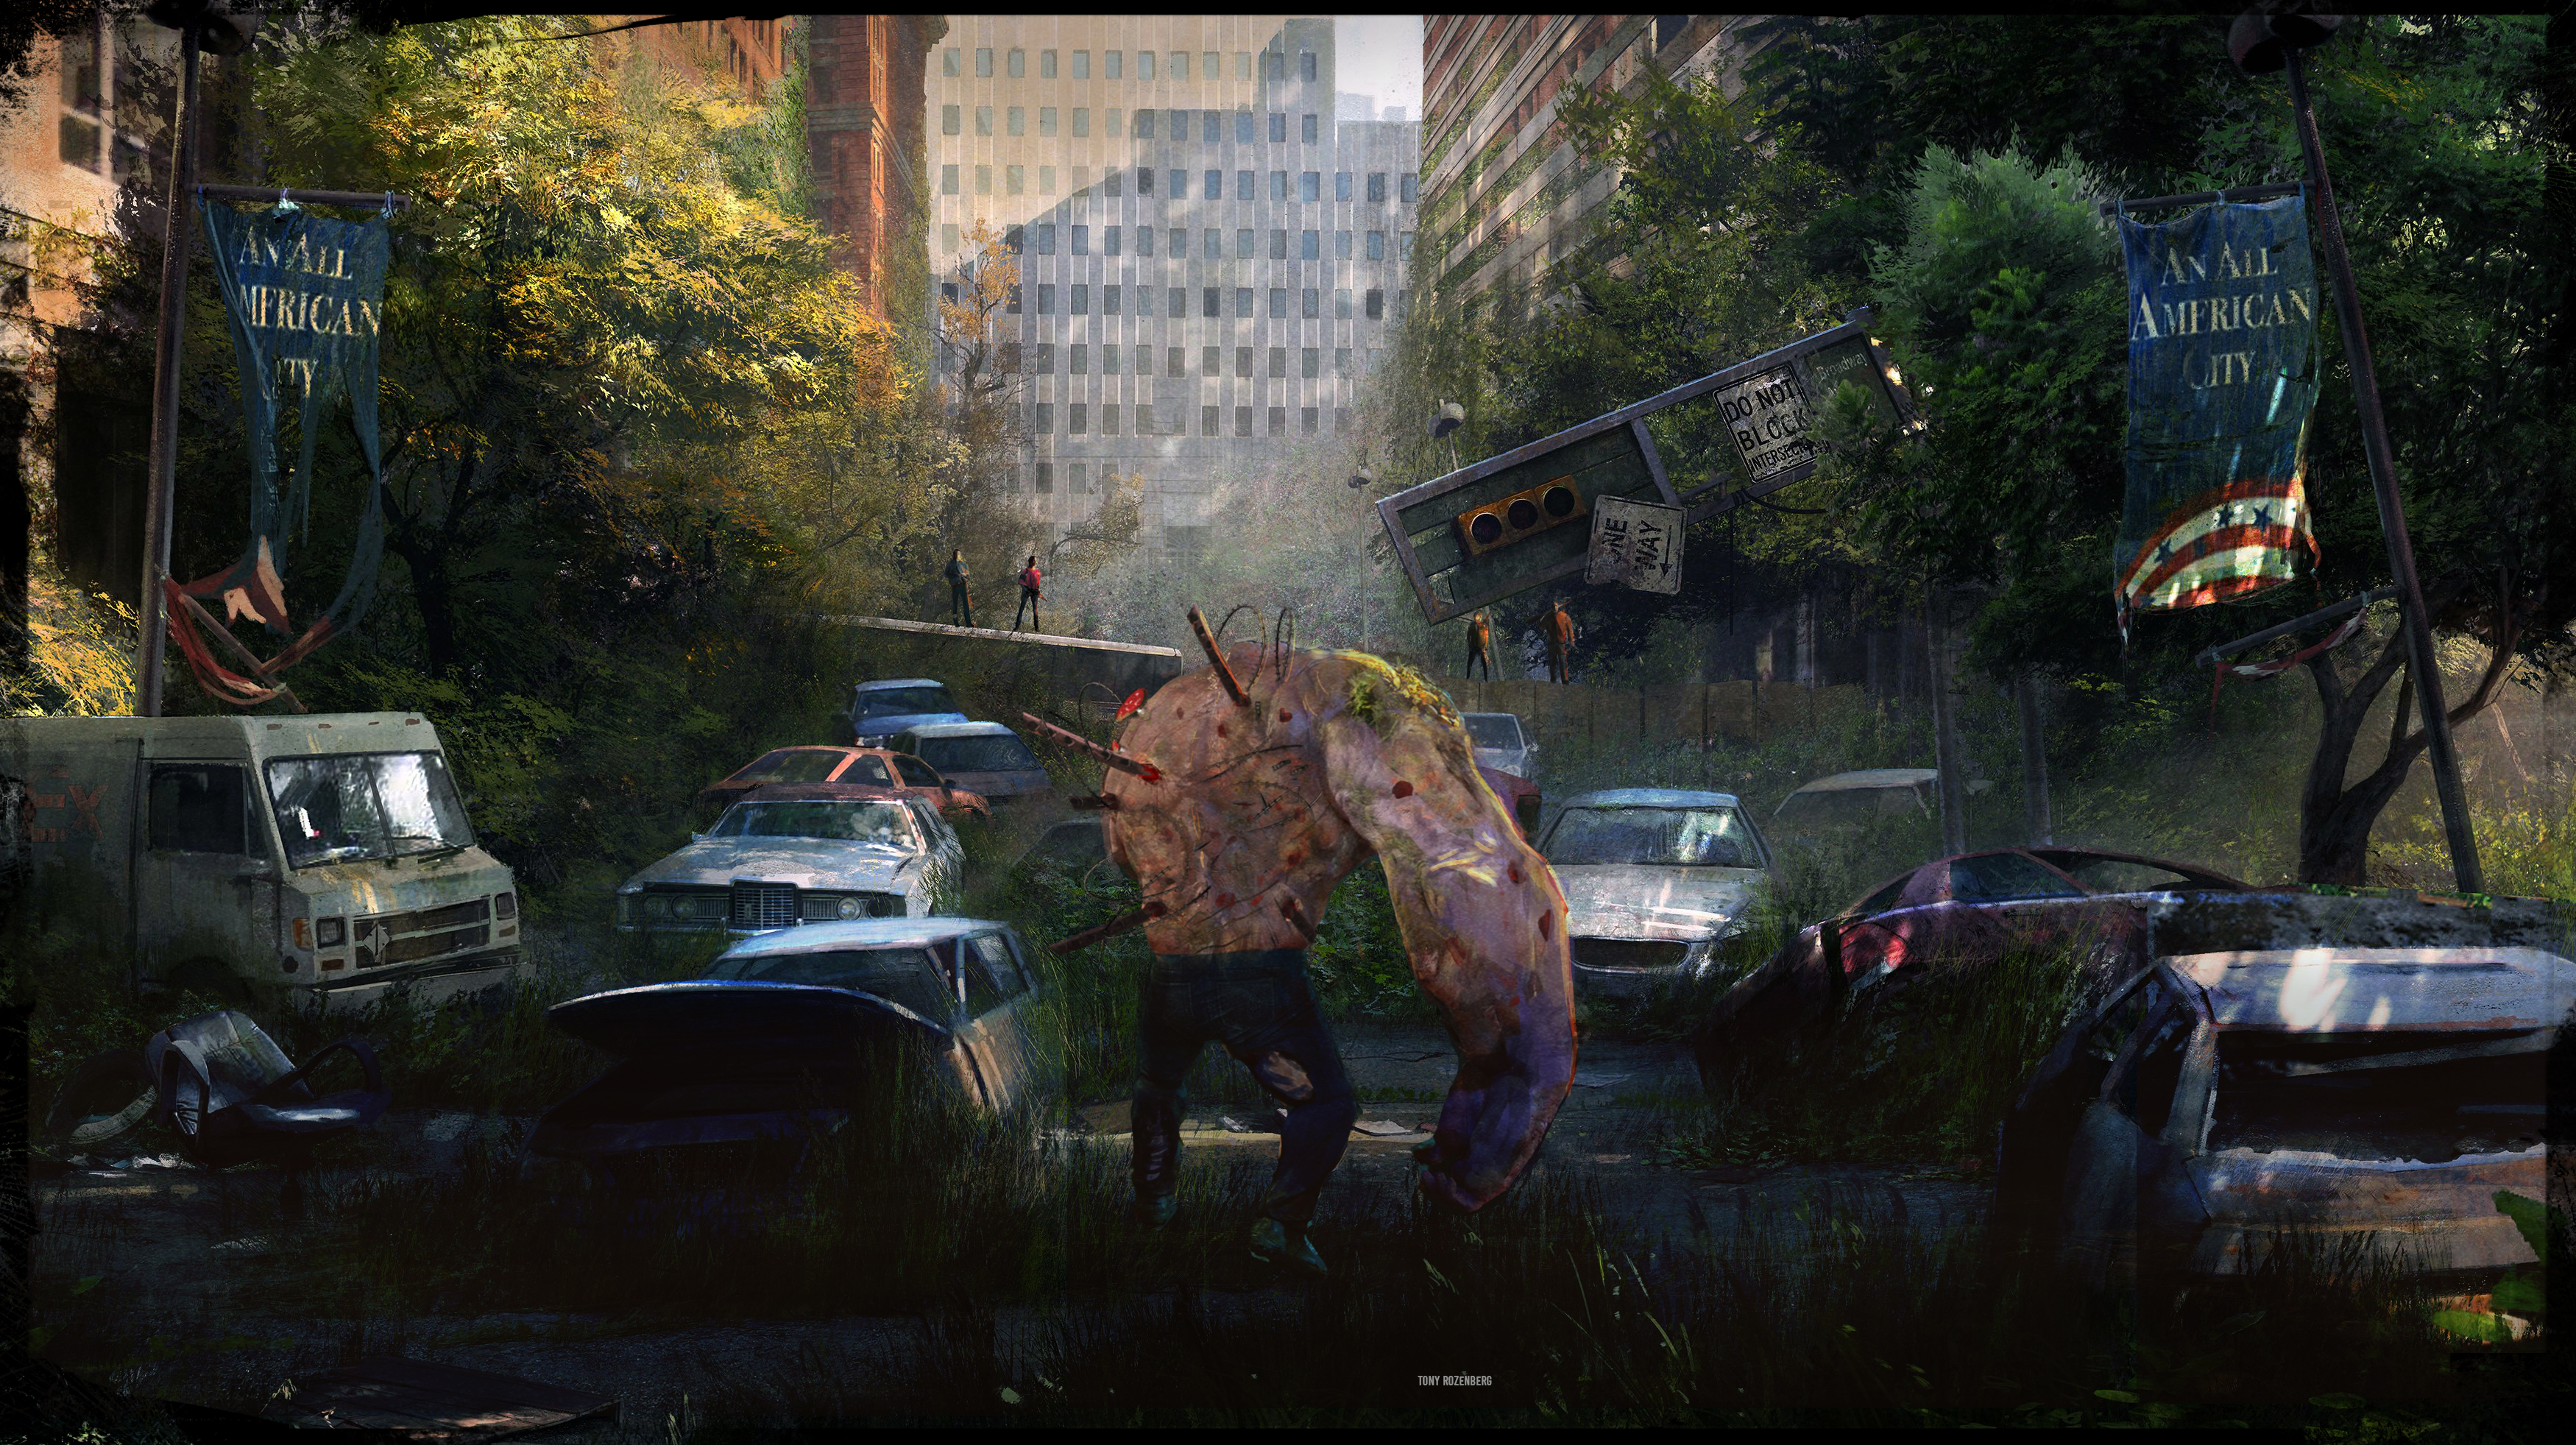 Art Wallpaper for The Last of Us Part 2 image - ModDB